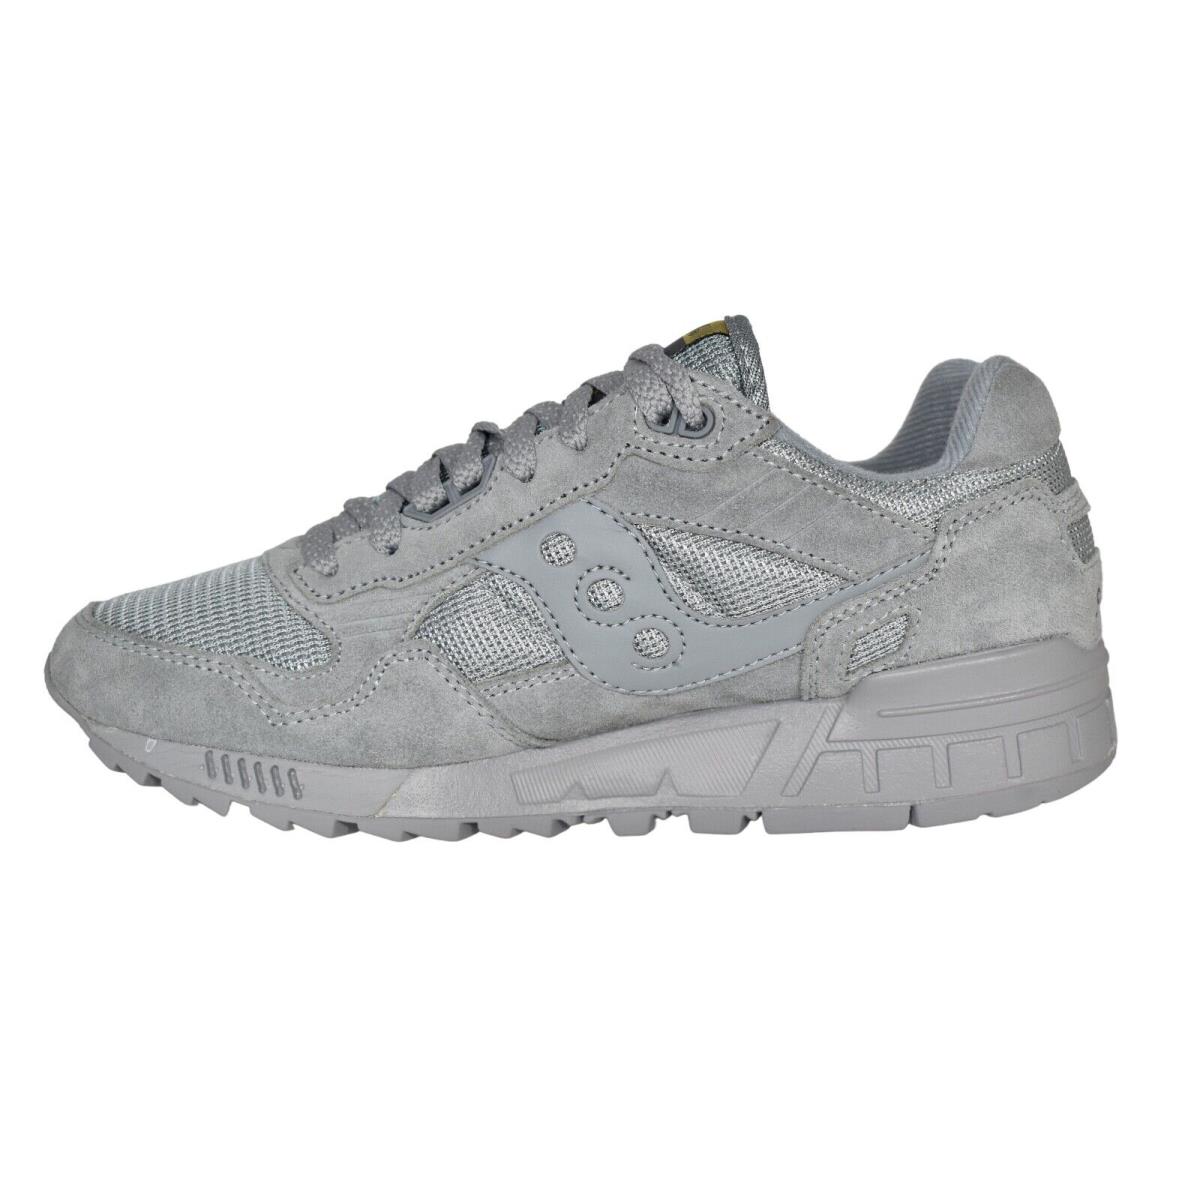 Saucony shoes Shadow - Gray 0